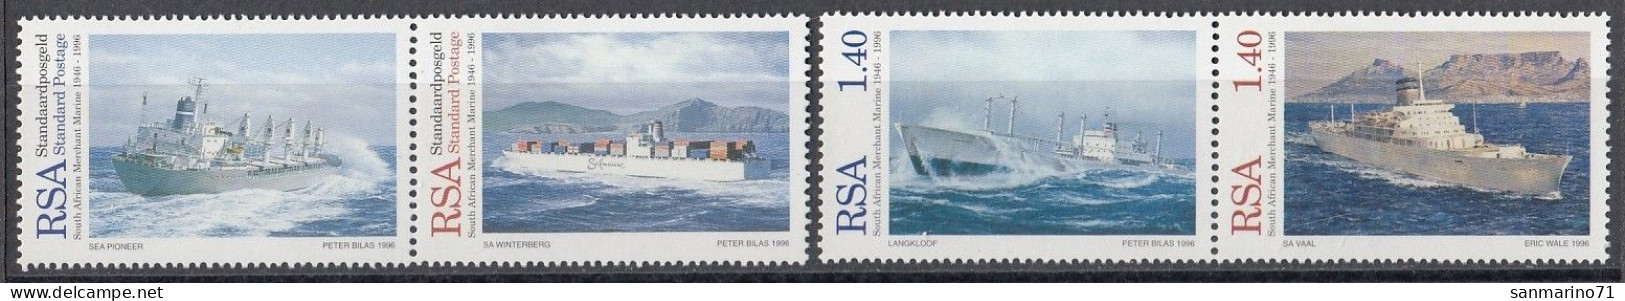 SOUTH AFRICA 1016-1019,unused,ships - Unused Stamps